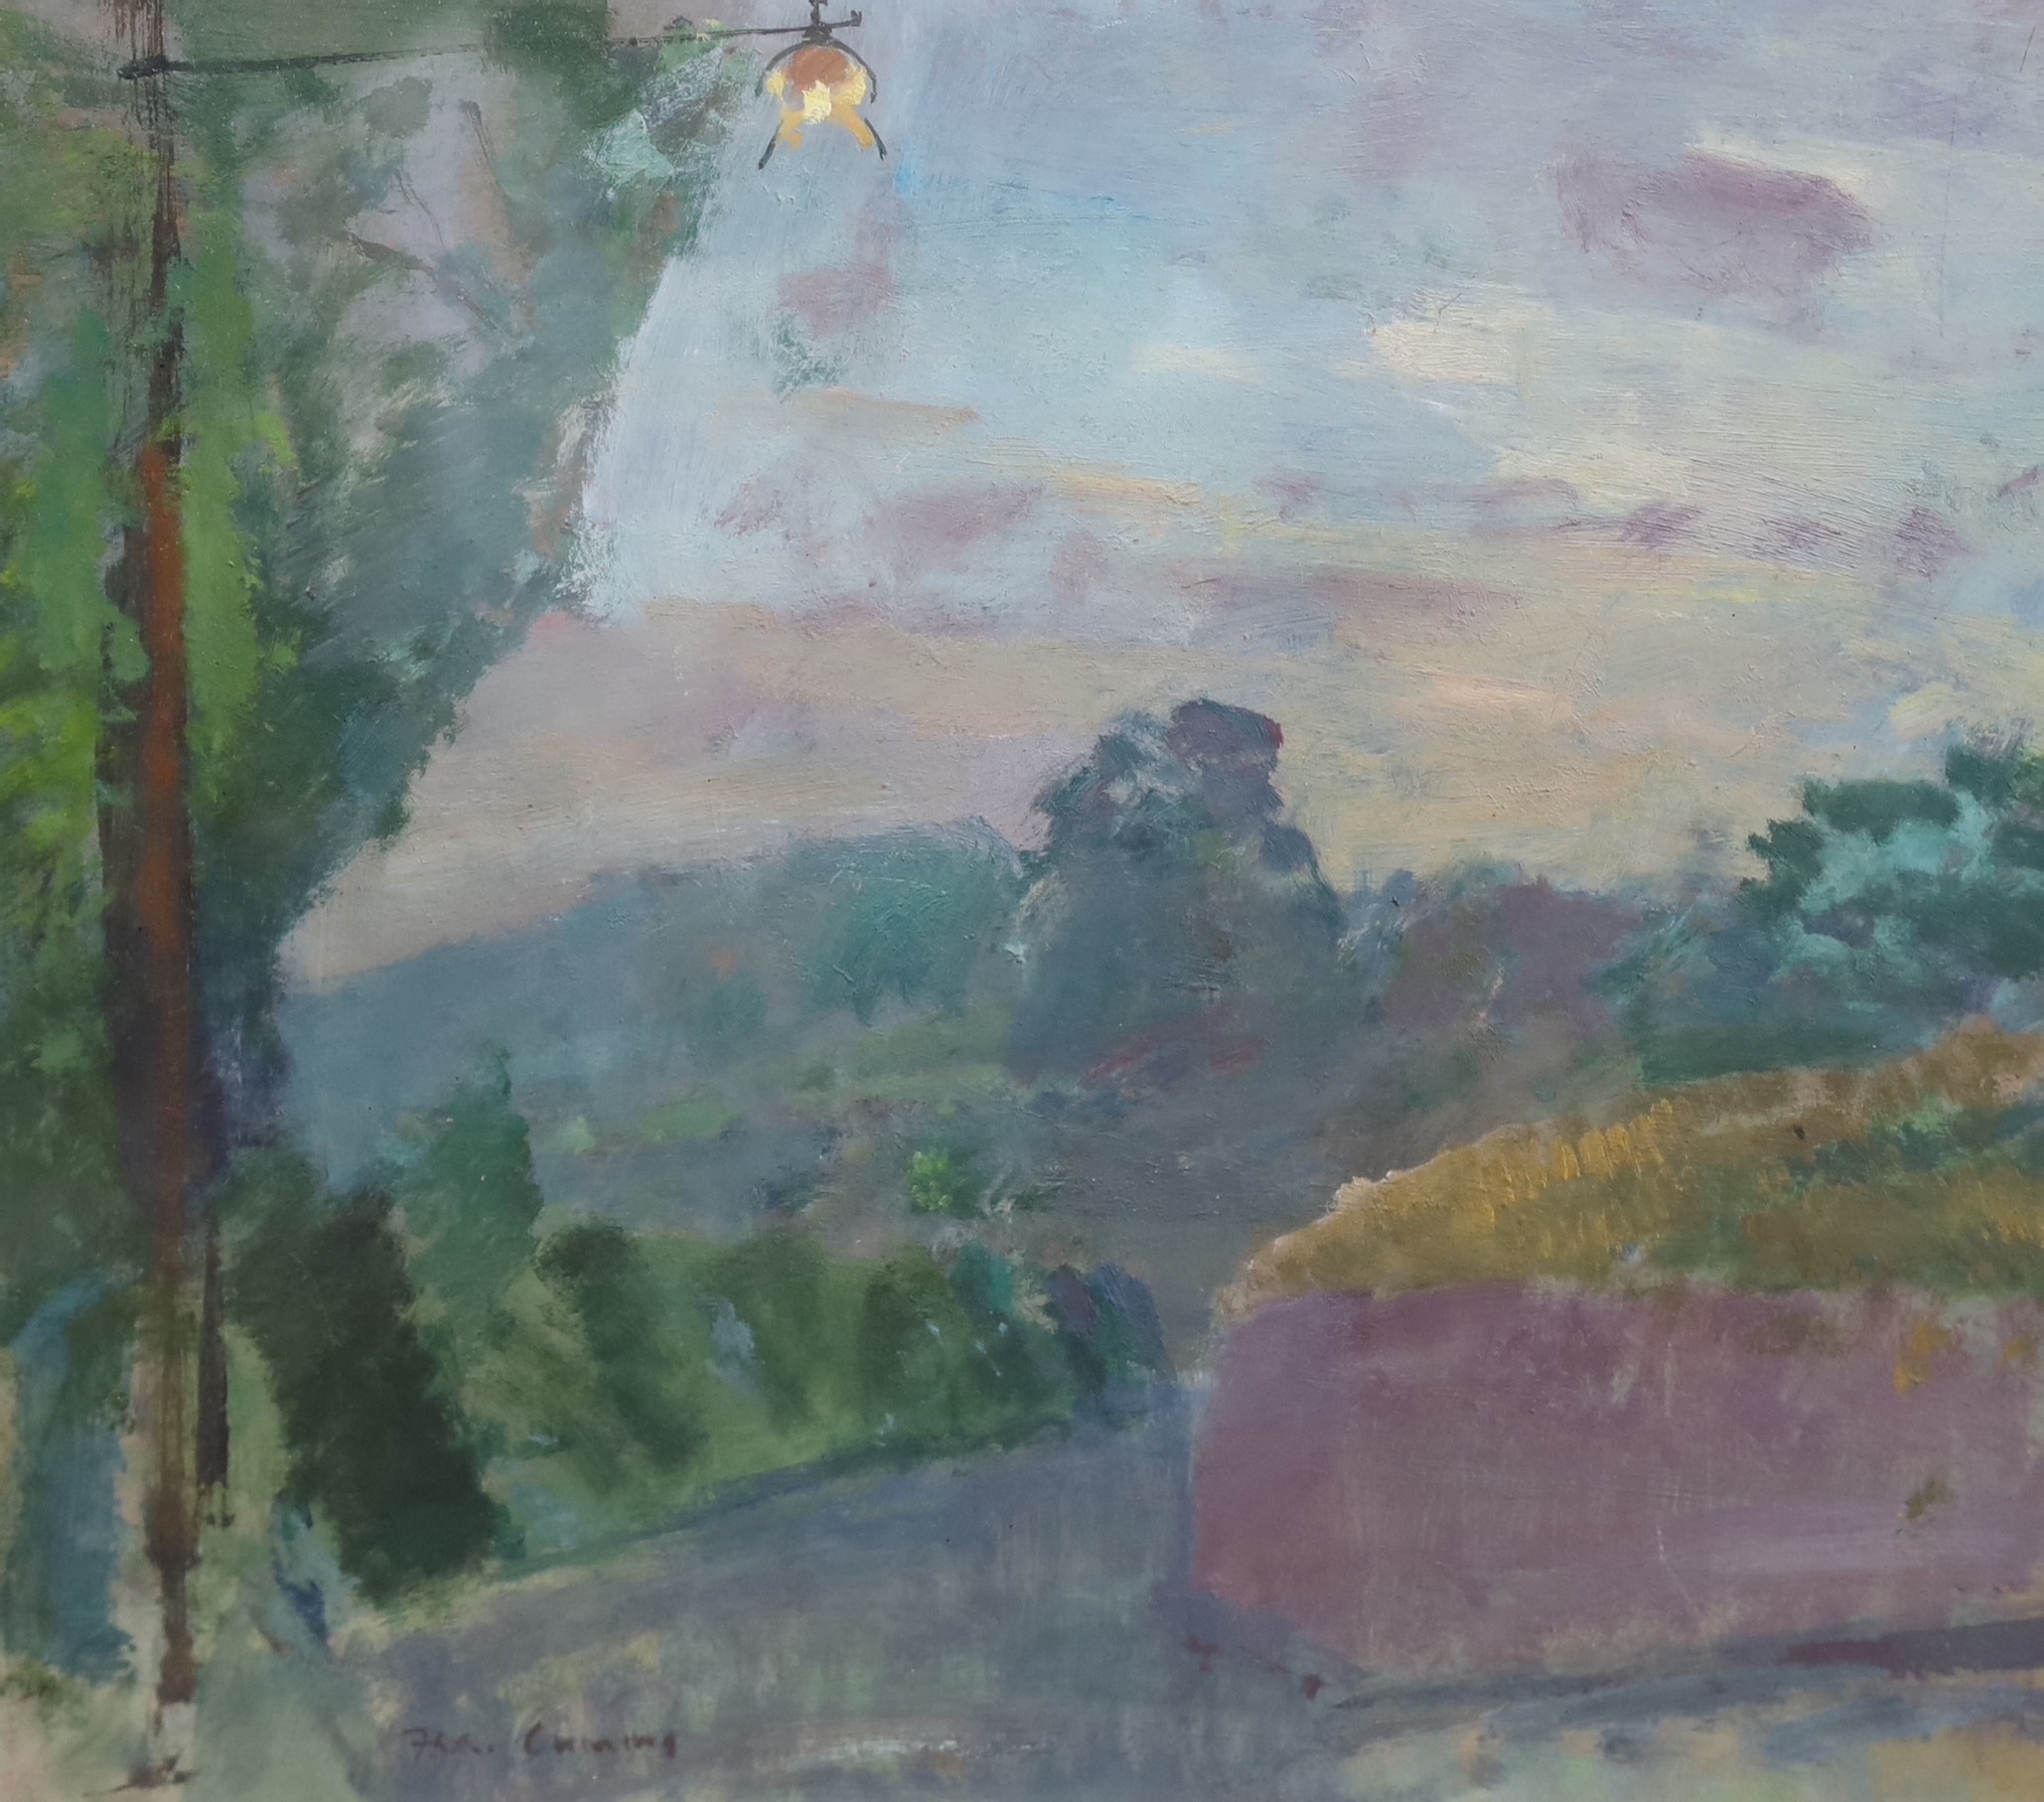 Fred Cuming R.A. (1930-2022), Landscape with lamp post, oil on board, 35 x 30cm